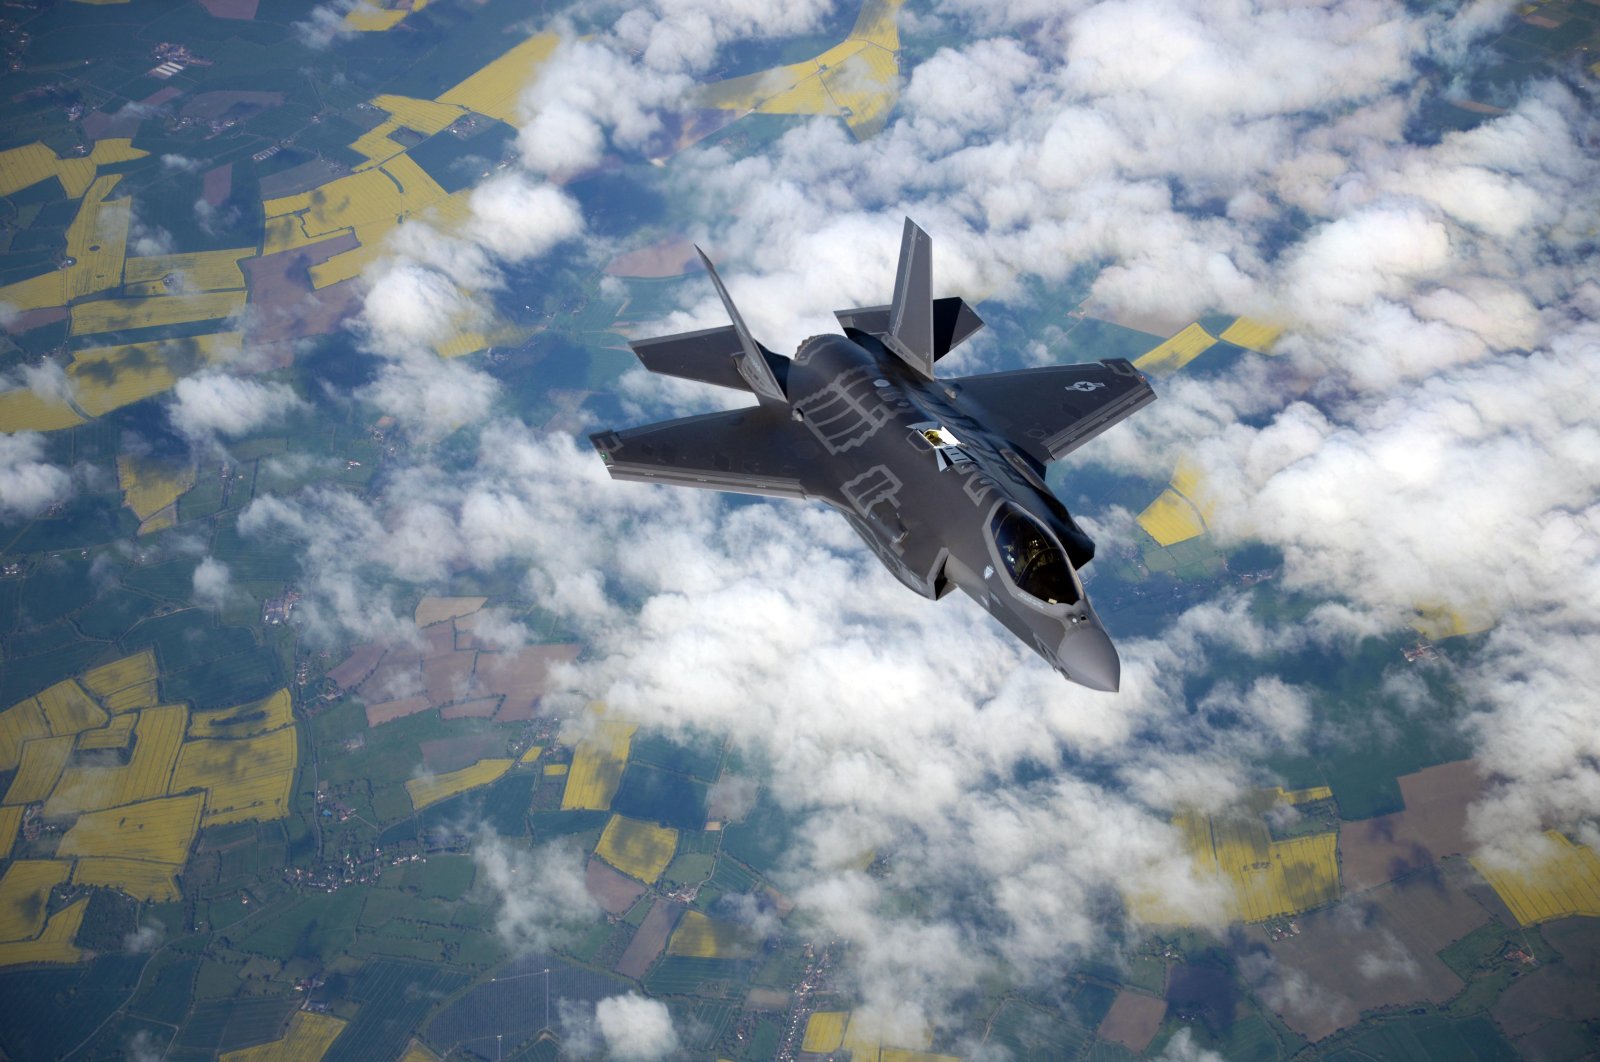 This U.S. Air Force file photo shows an F-35 Lightning II jet flying above an undisclosed location on June 12, 2017.  (Photo by Christine Groening /U.S. AIR FORCE / AFP)